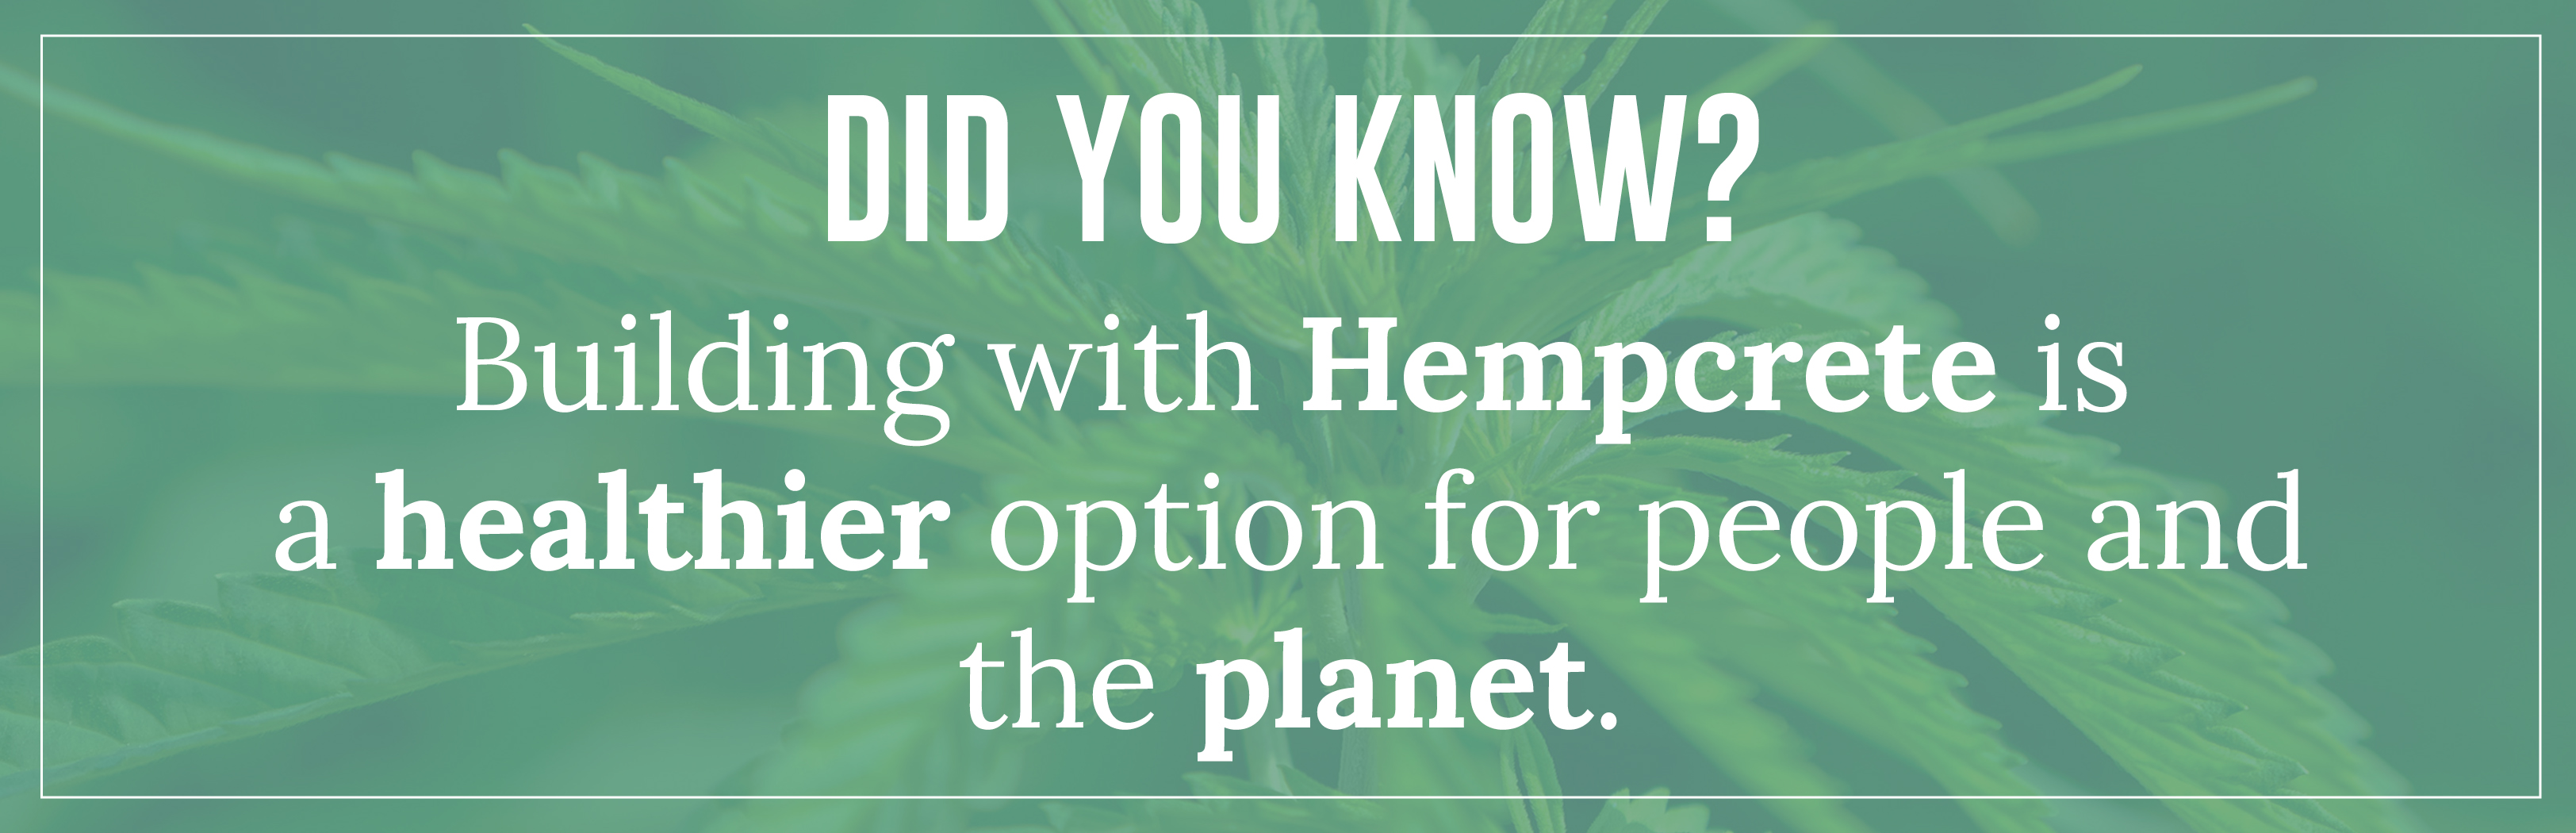 Building with Hempcrete is a healthier option for people and the planet.